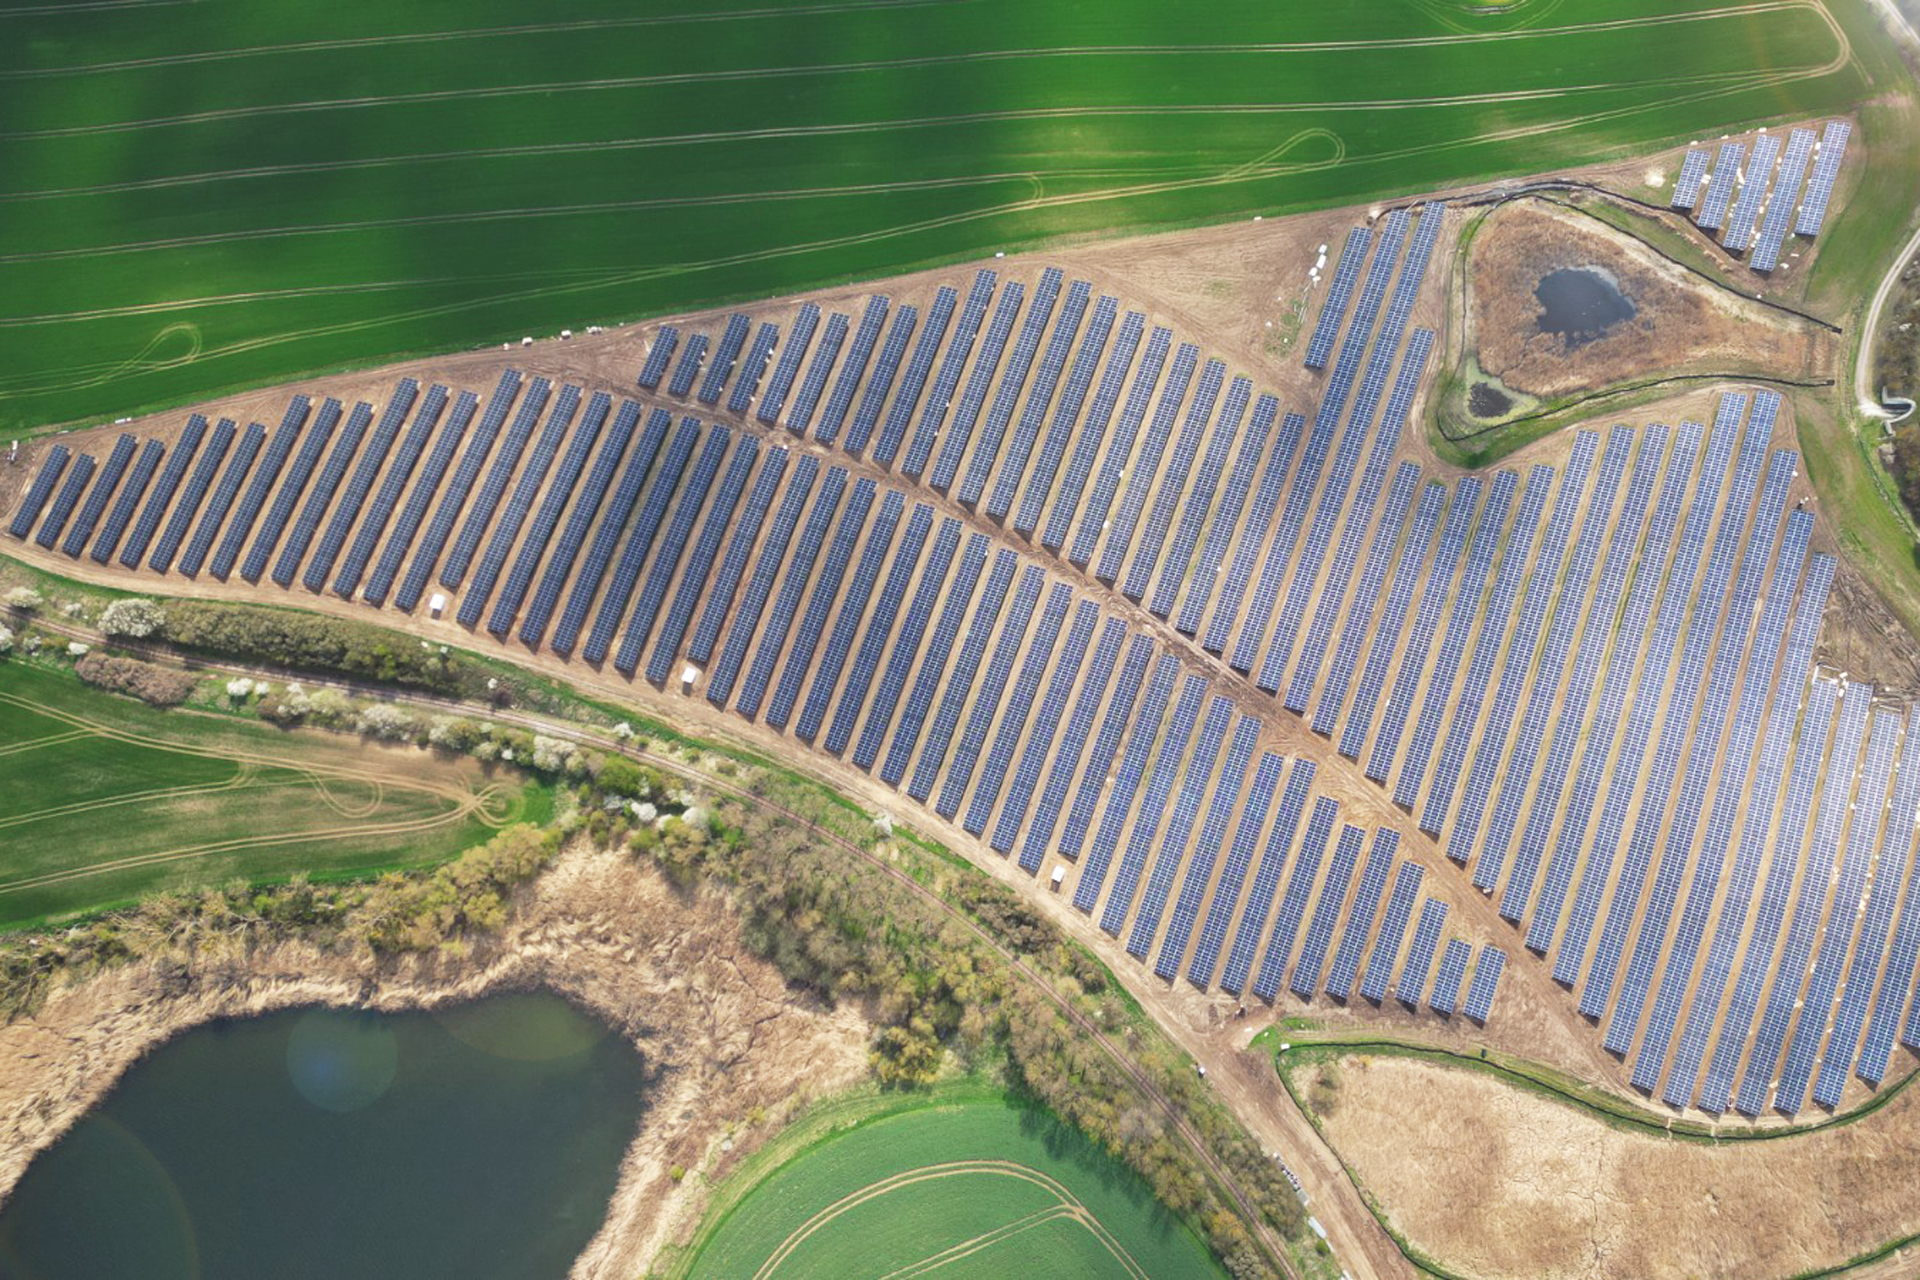 SENS connects solar park with 20 MWp to the grid for customer Enertrag